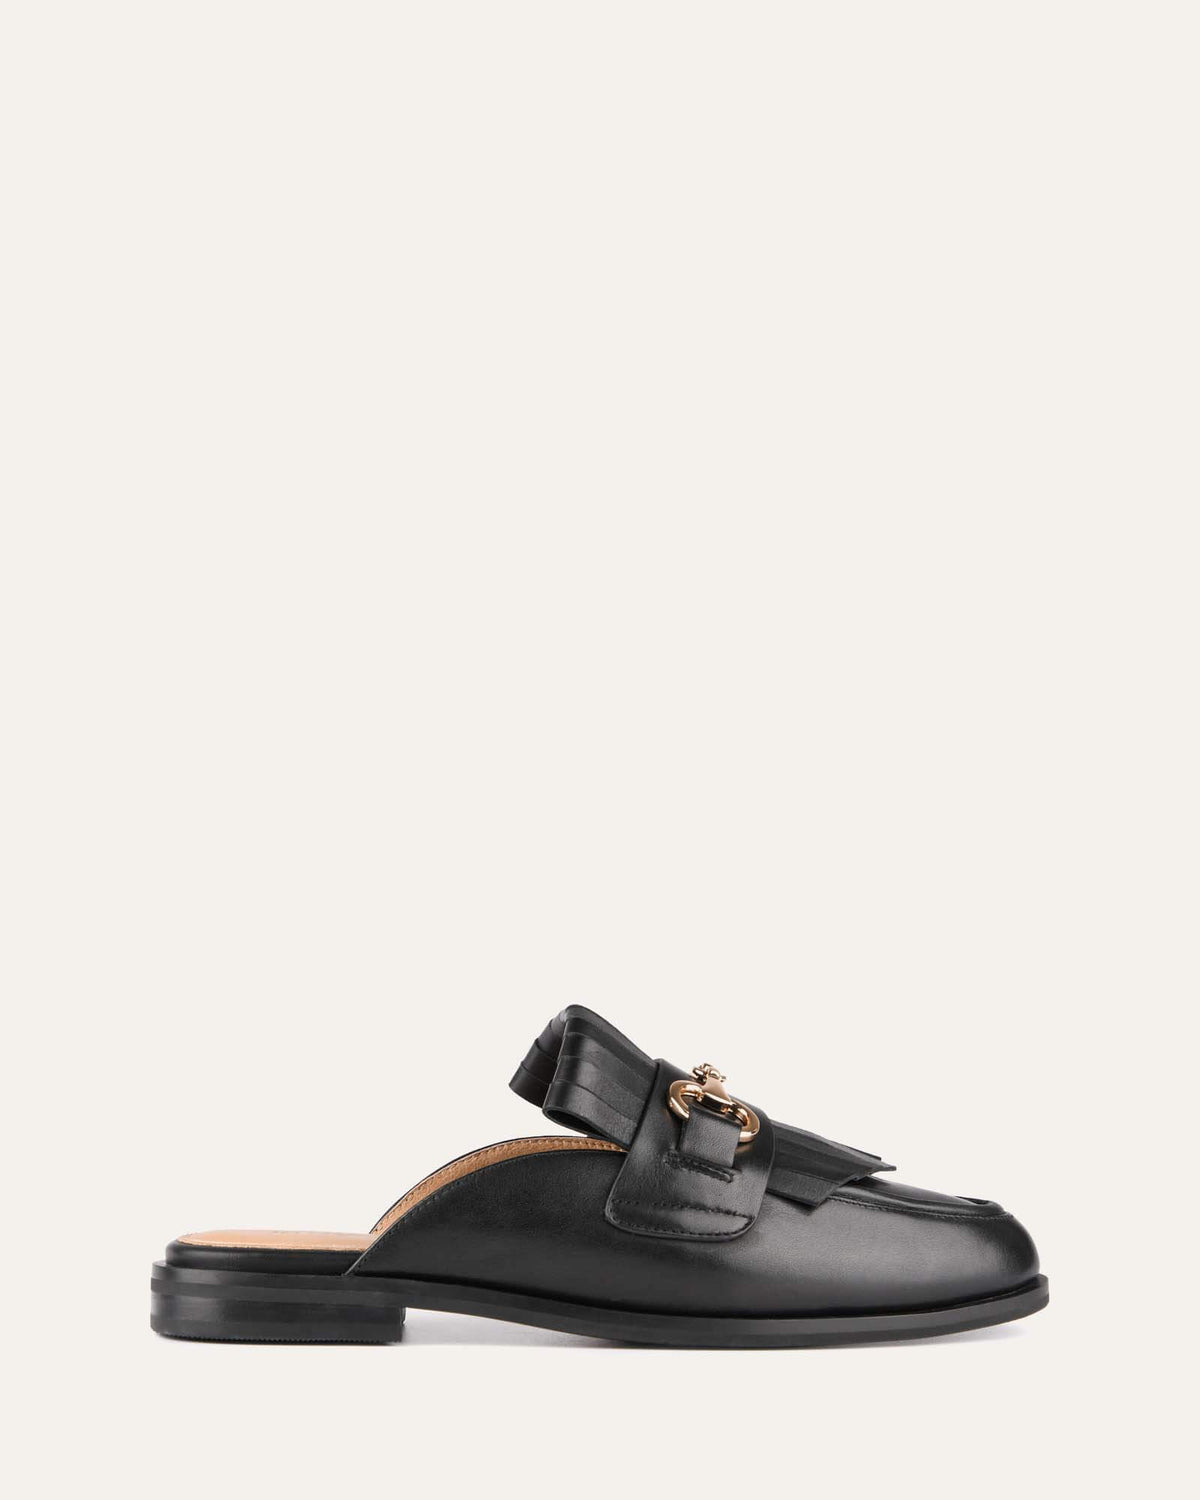 WESSEX LOAFERS BLACK LEATHER